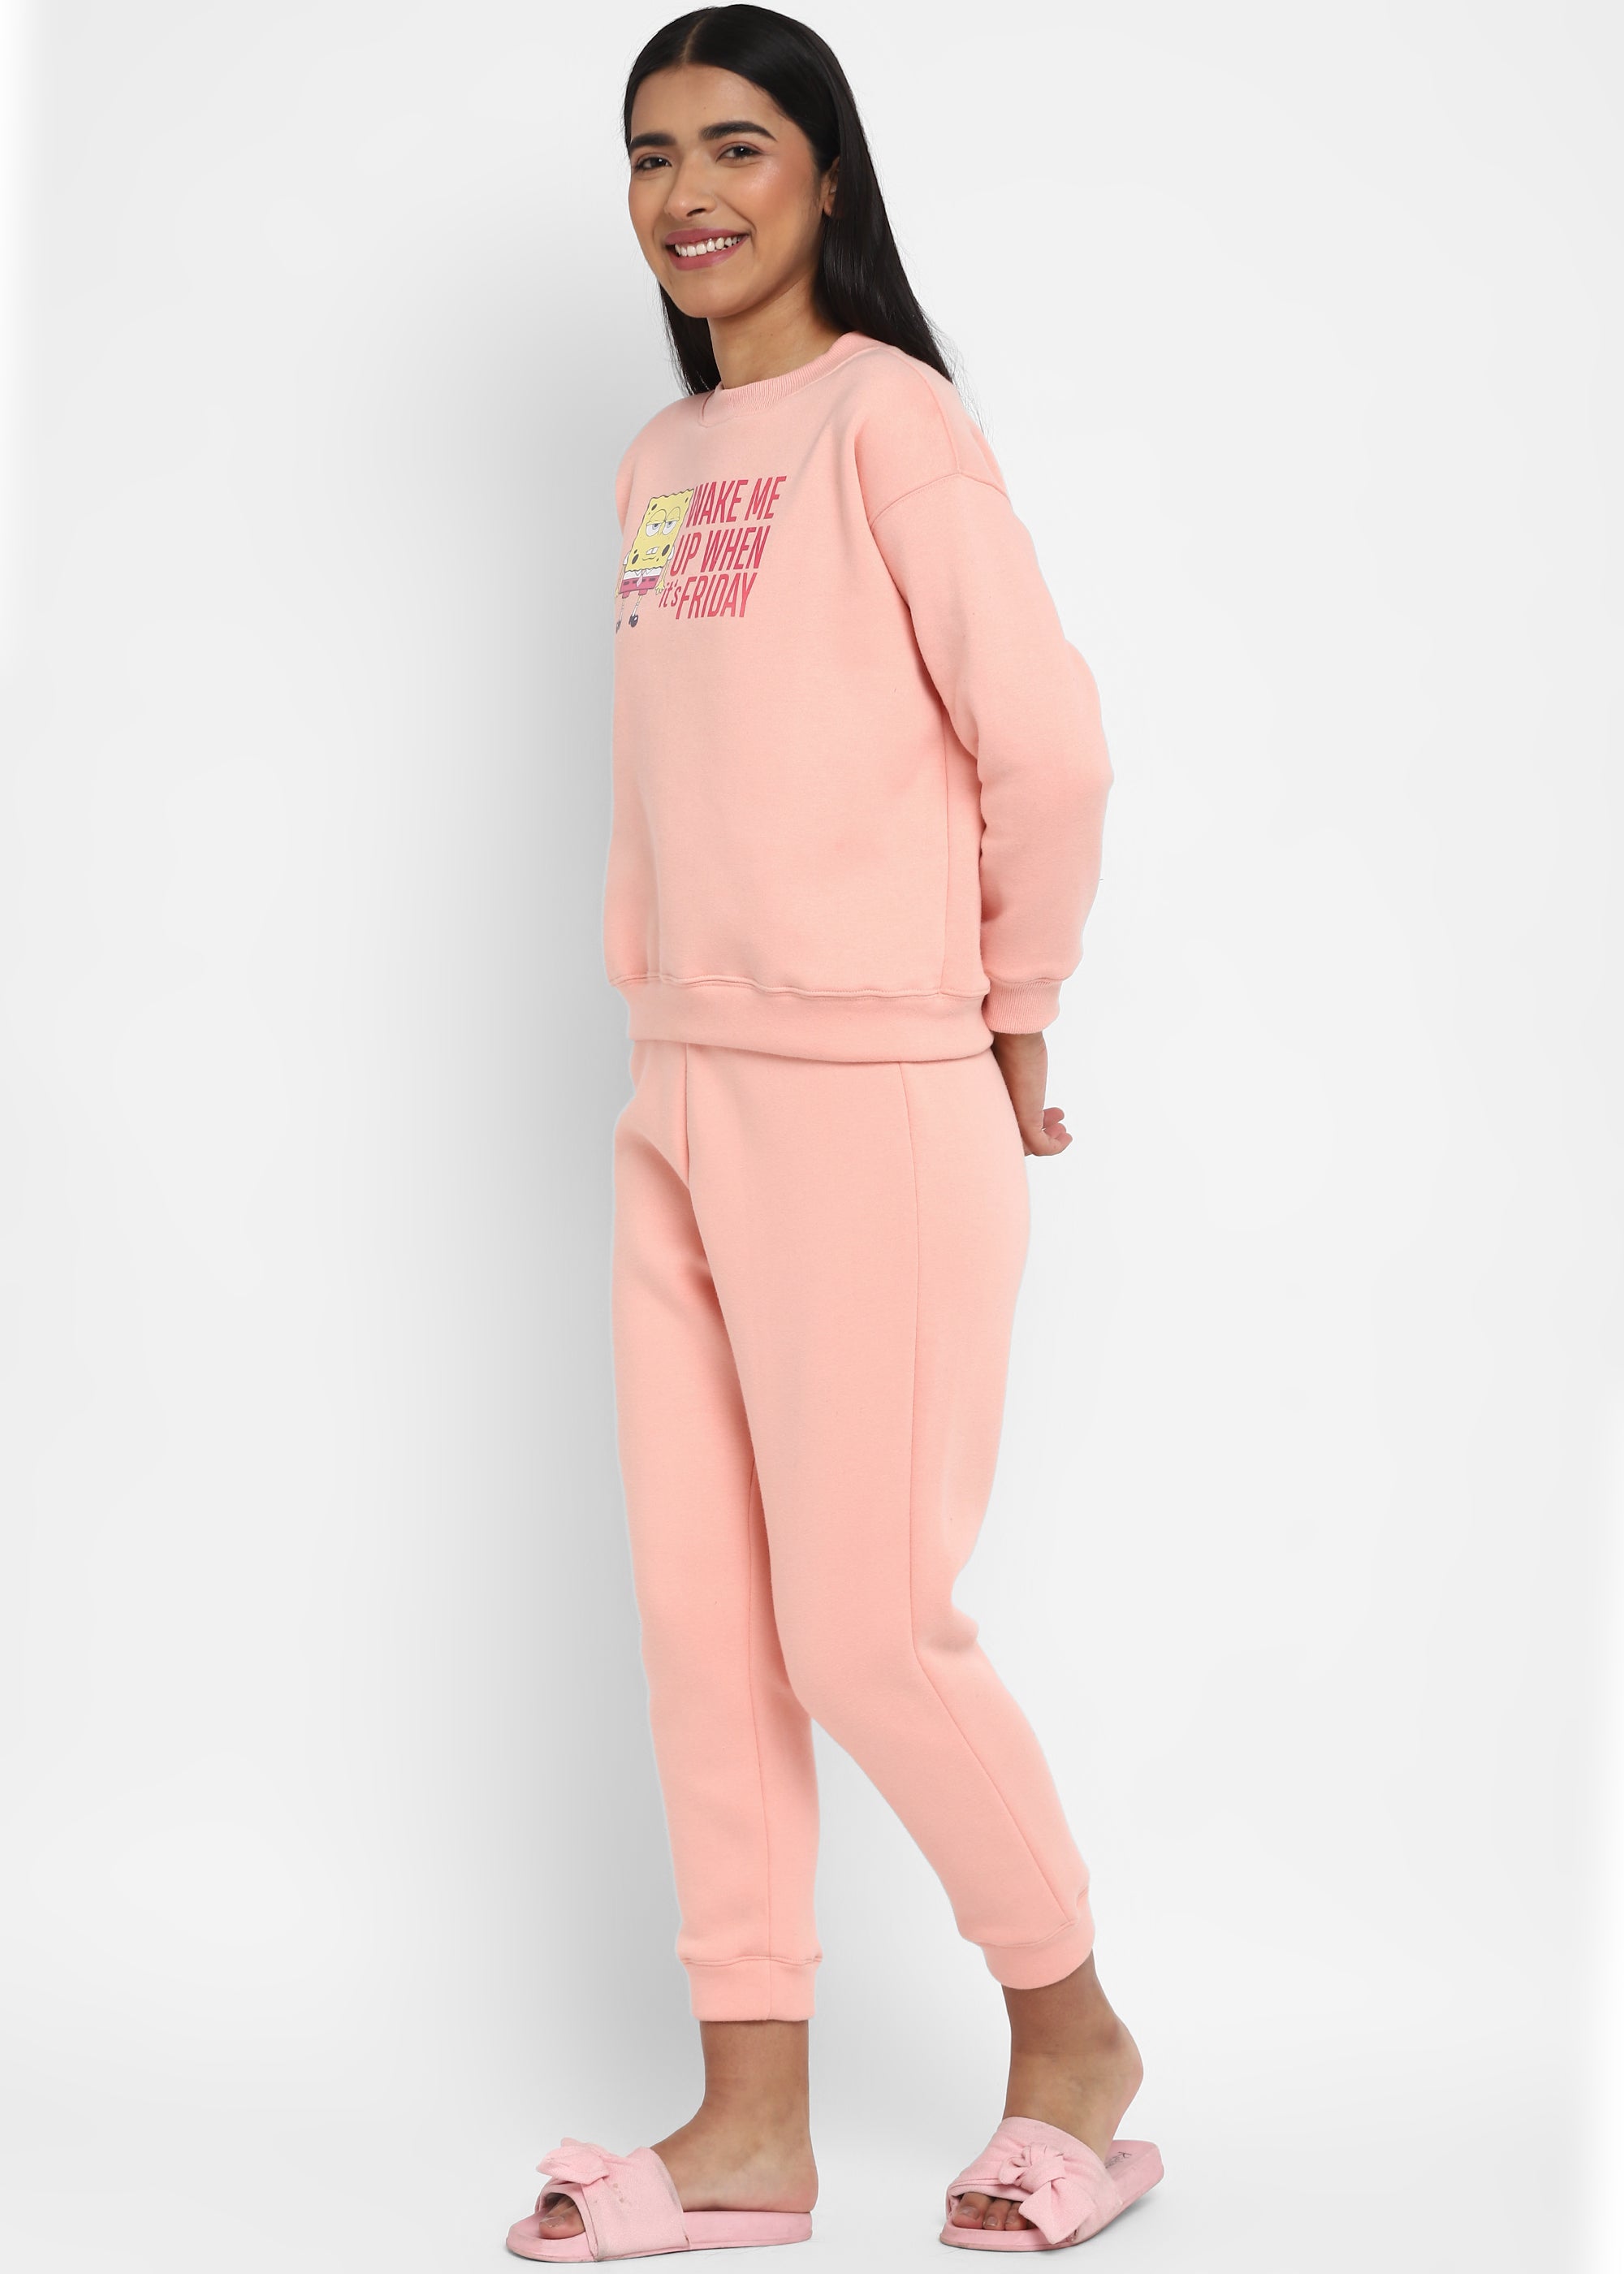 Wake Me Up When It's Friday Long Sleeve Women's Co-ord Set - Shopbloom